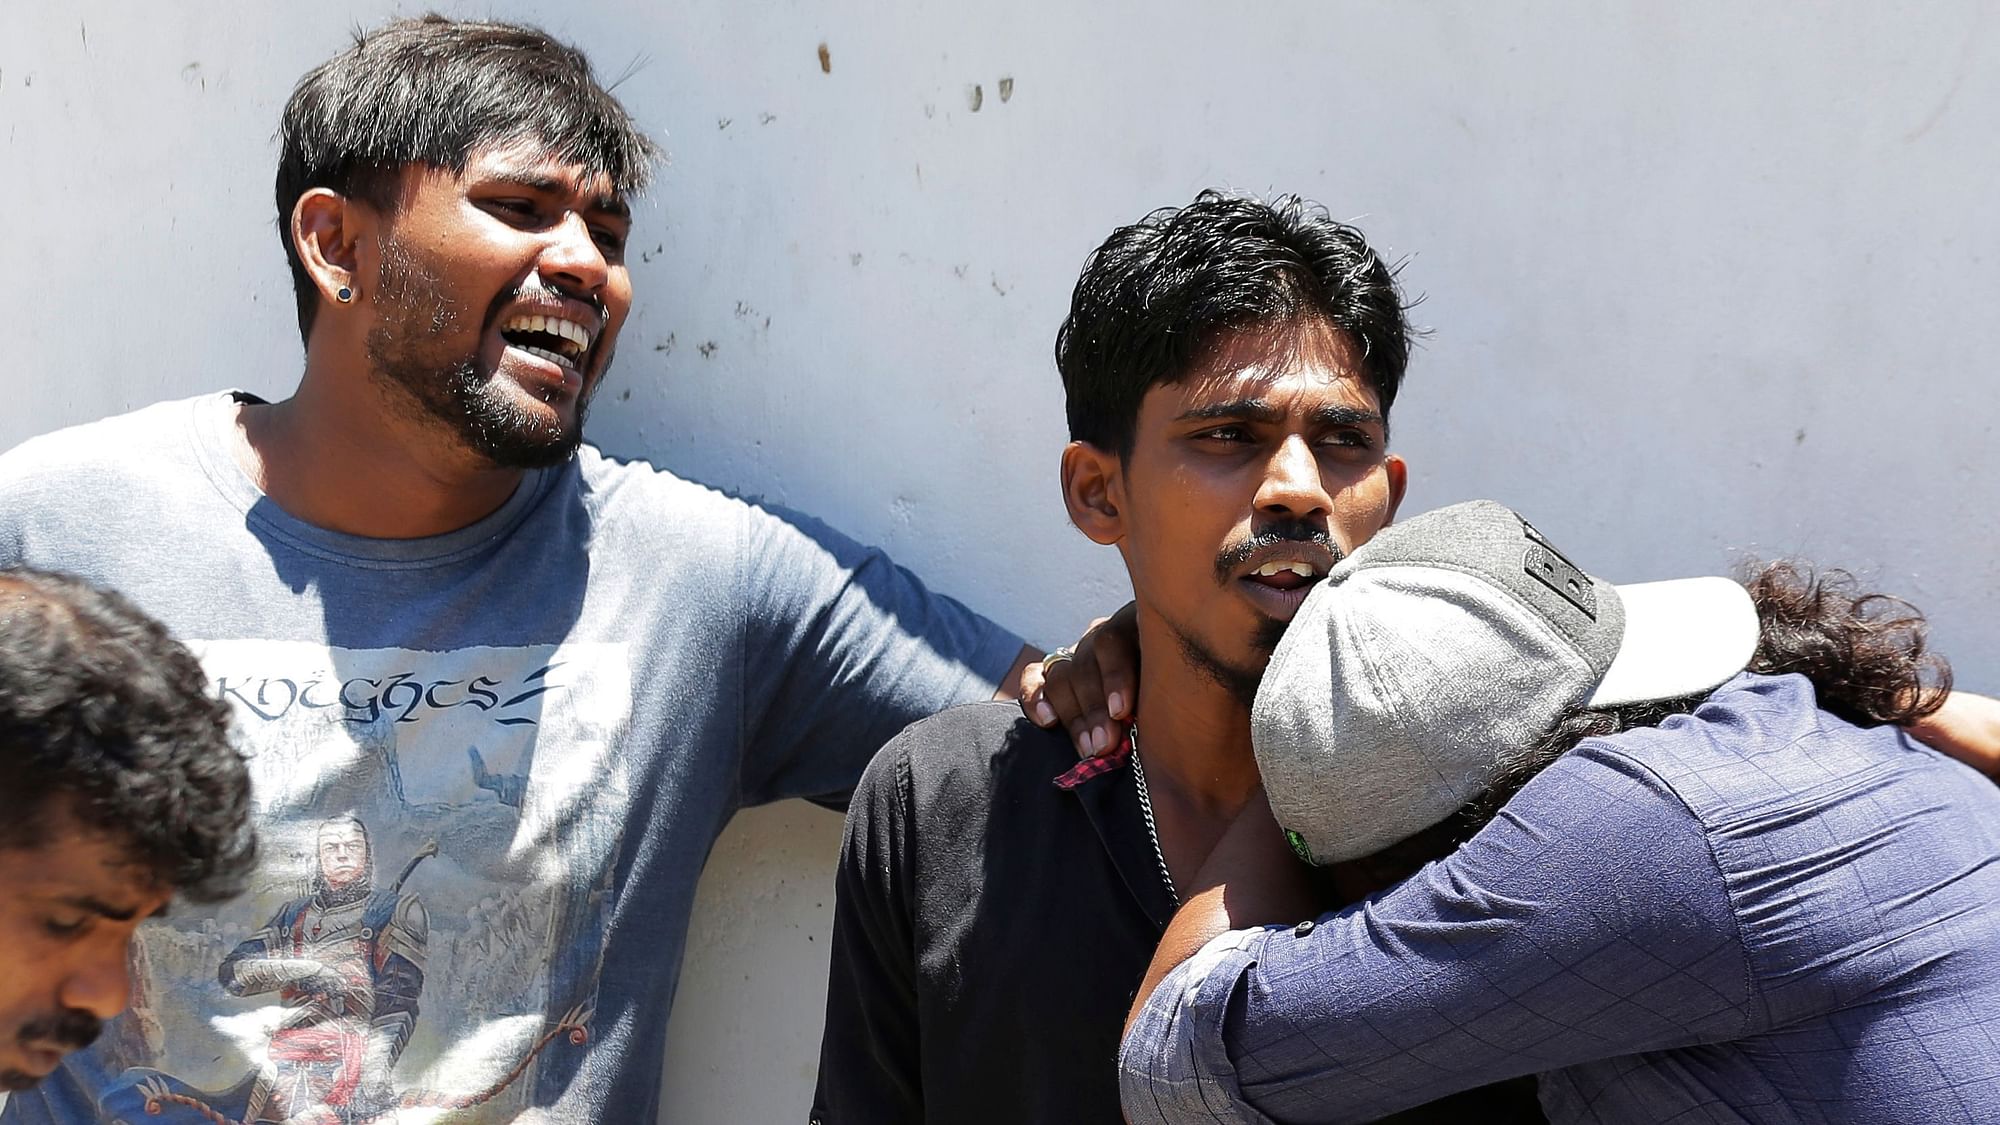 Relatives of people killed in Church blasts mourn as they wait outside mortuary of a hospital in Colombo, Sri Lanka, 21 April 2019.